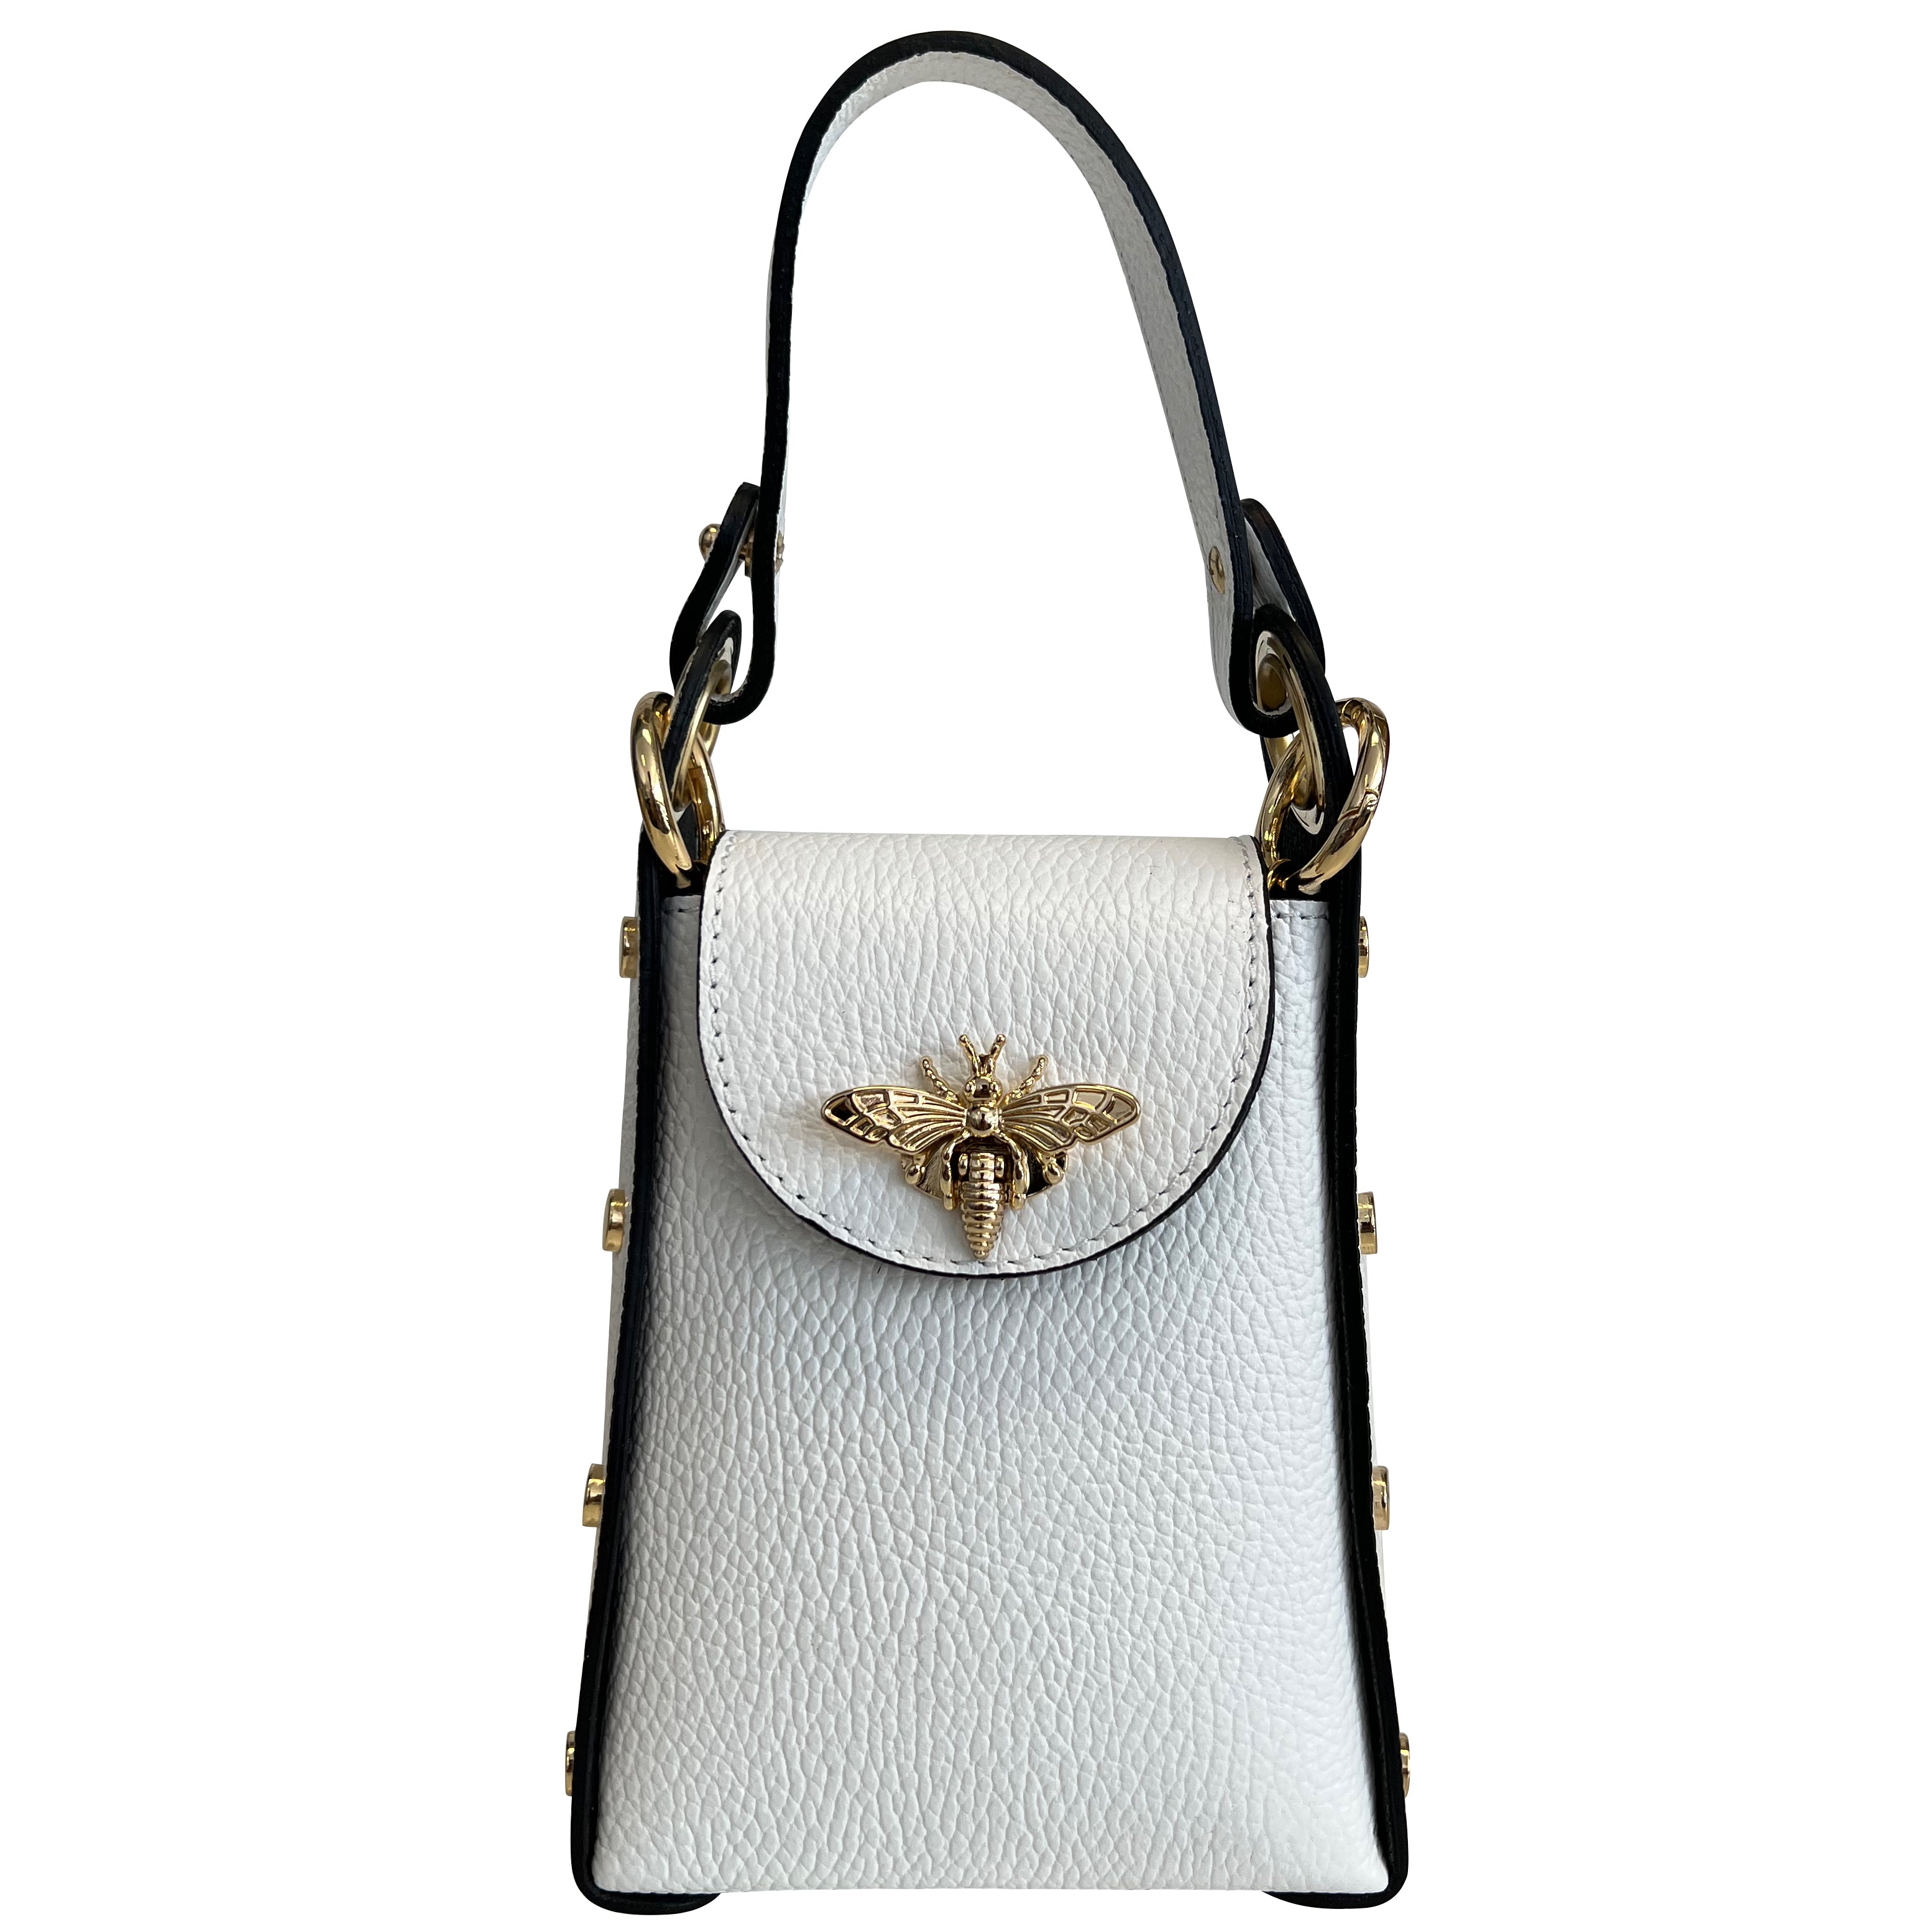 Modarno mini bag in genuine dollar leather with bee-shaped lobster clasp closure